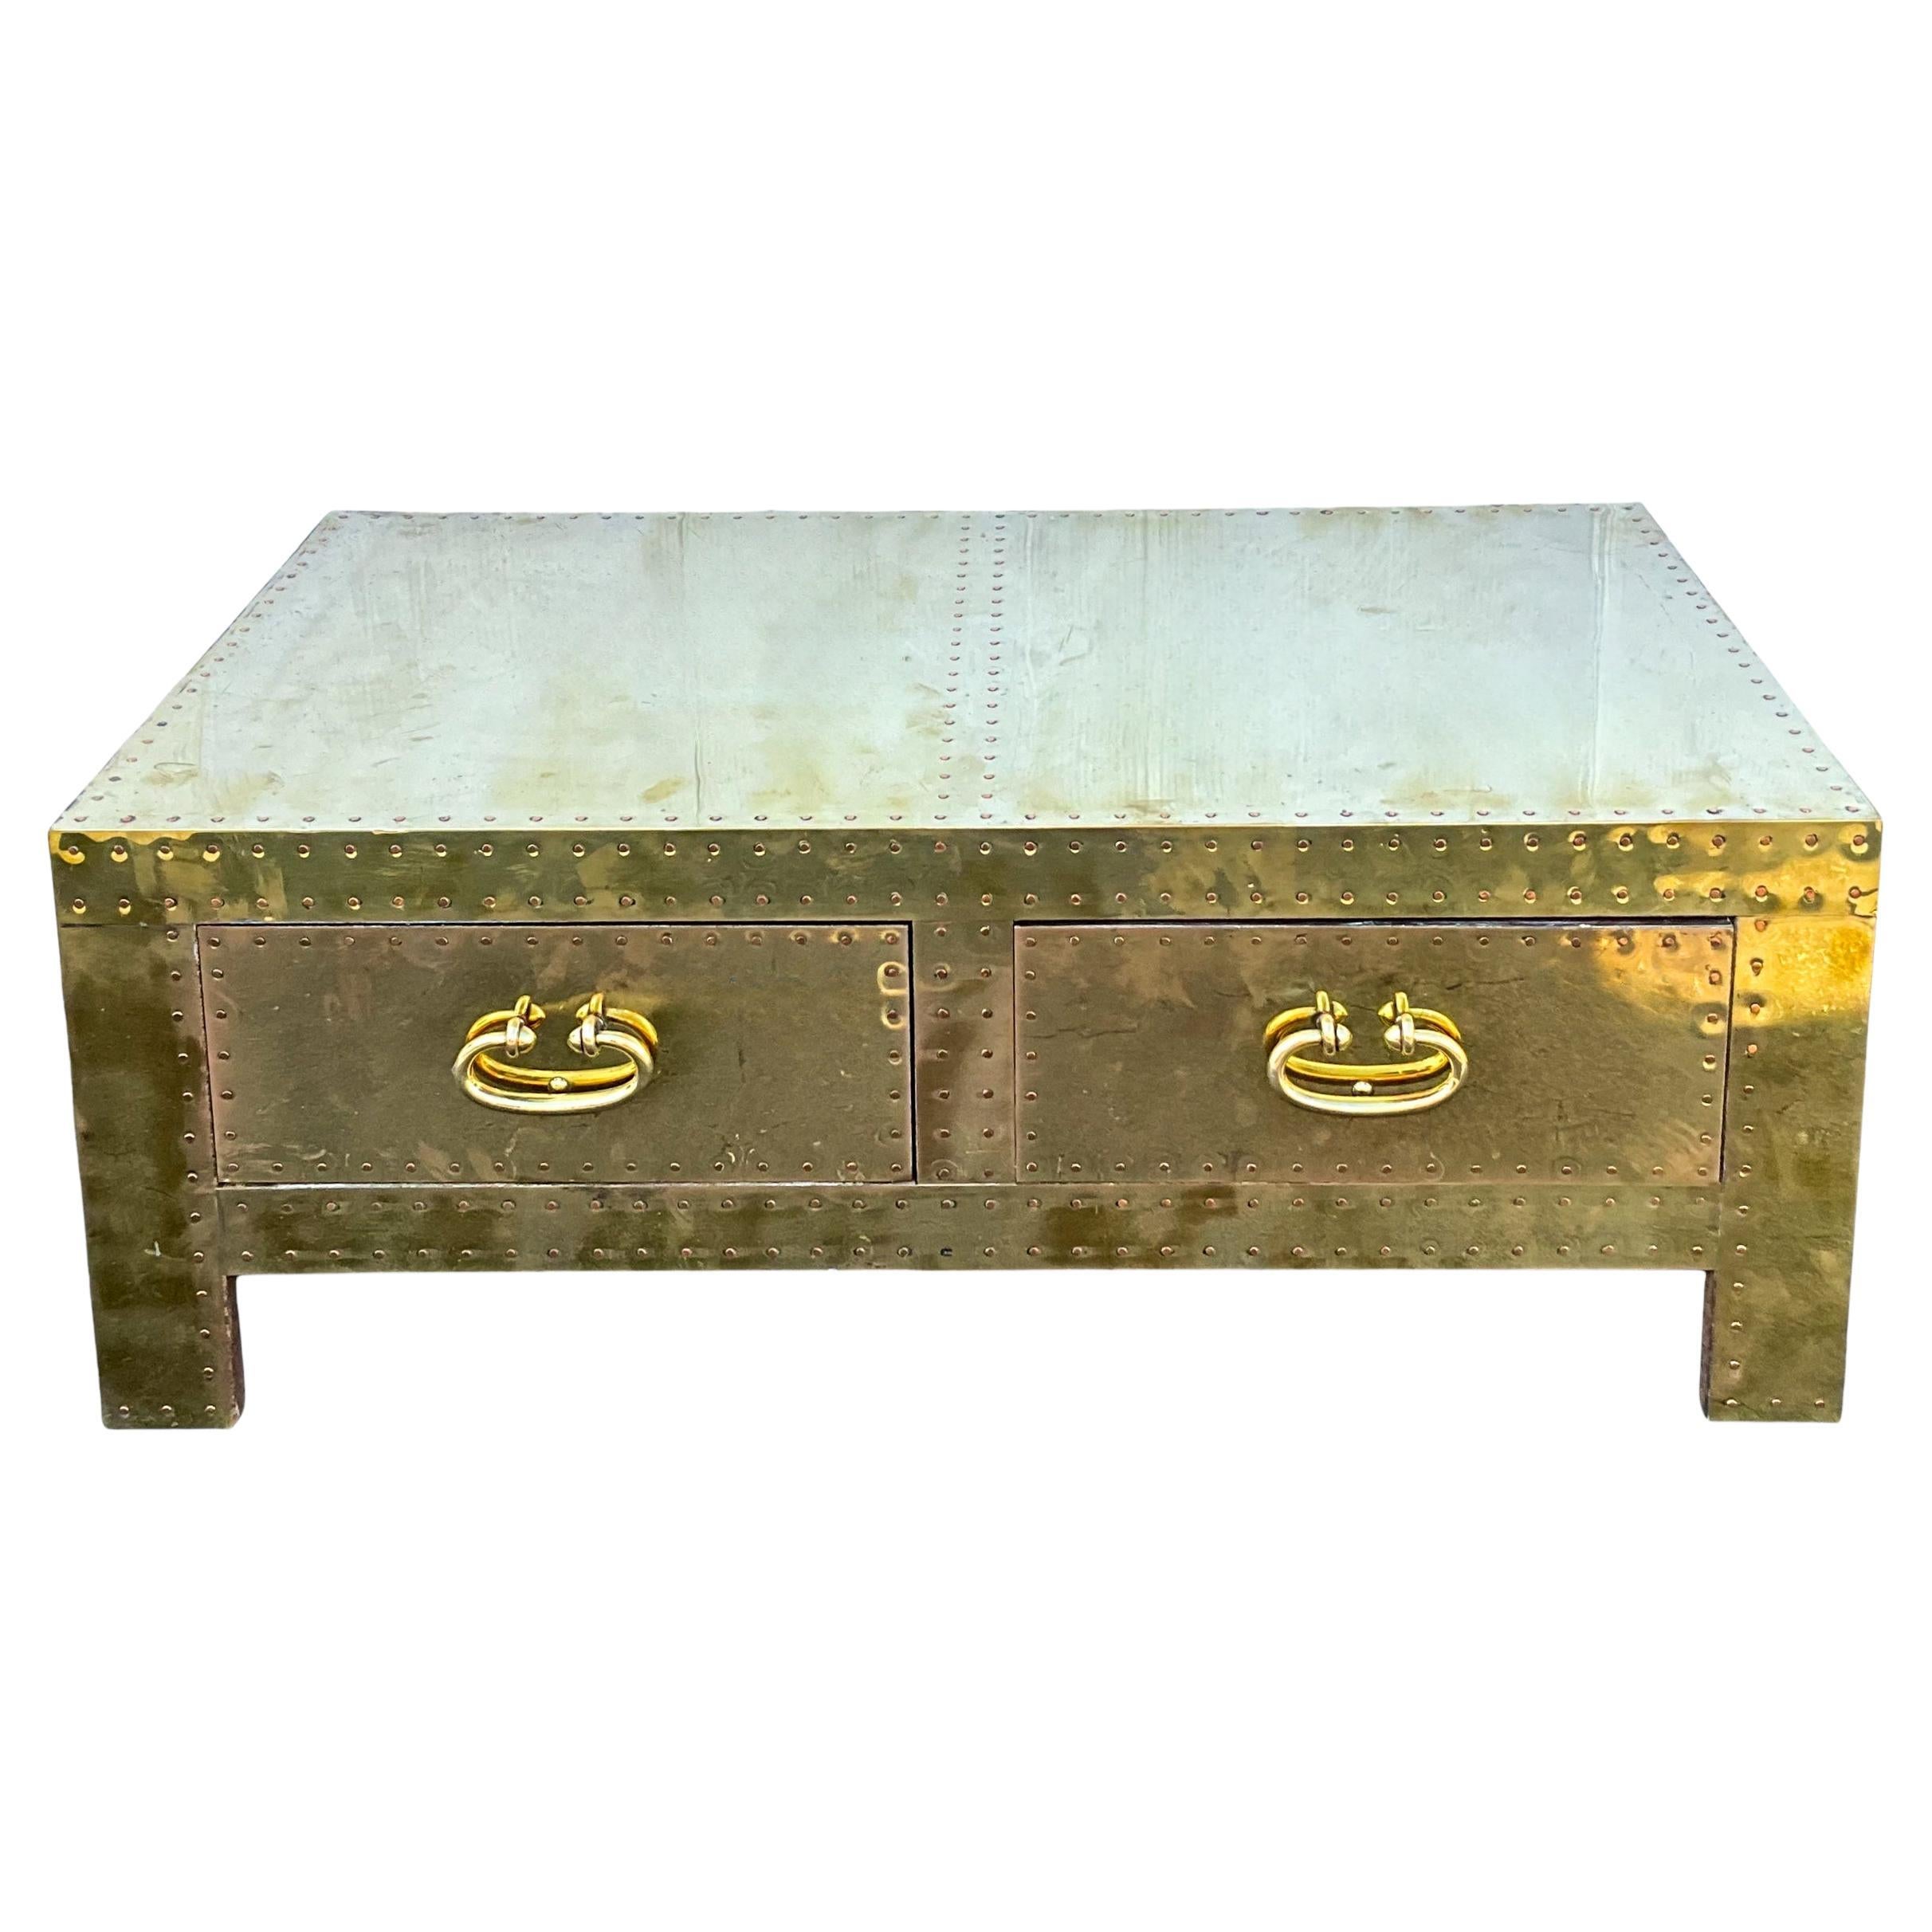 1970s Campaign Style Brass Trunk / Coffee Table By Sarreid Ltd. For Sale